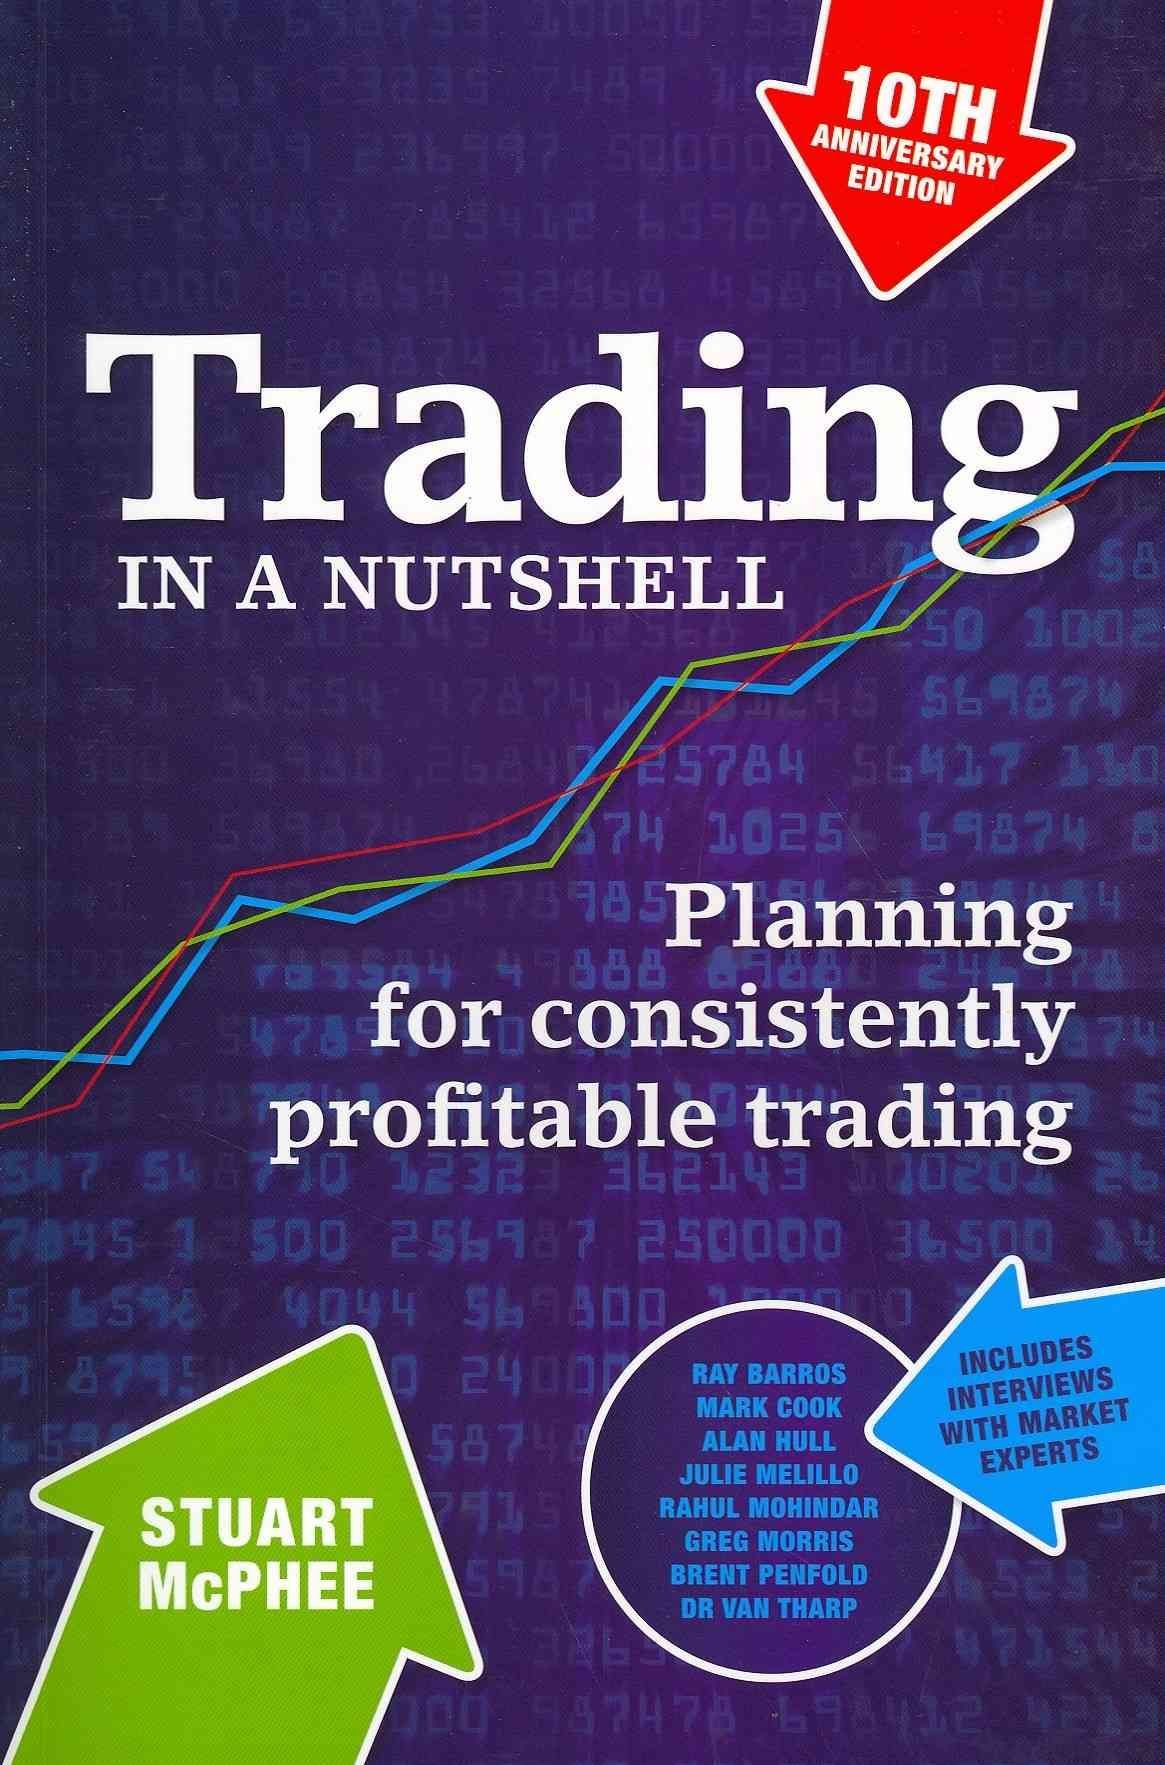 Trading in a Nutshell - Planning for consistently profitable trading 10e Anniversary